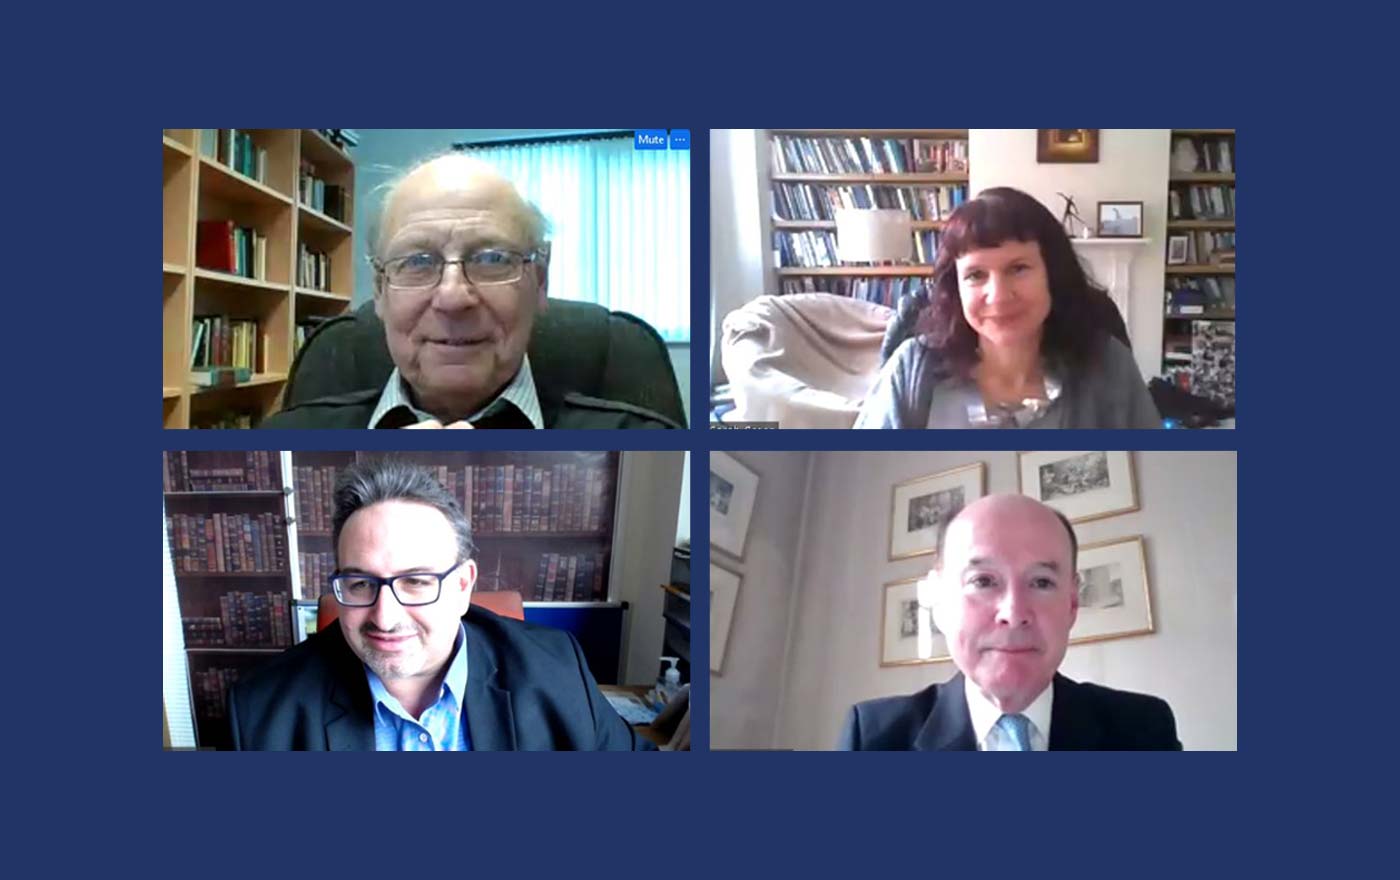 a screenshot from the webinar showing the speakers